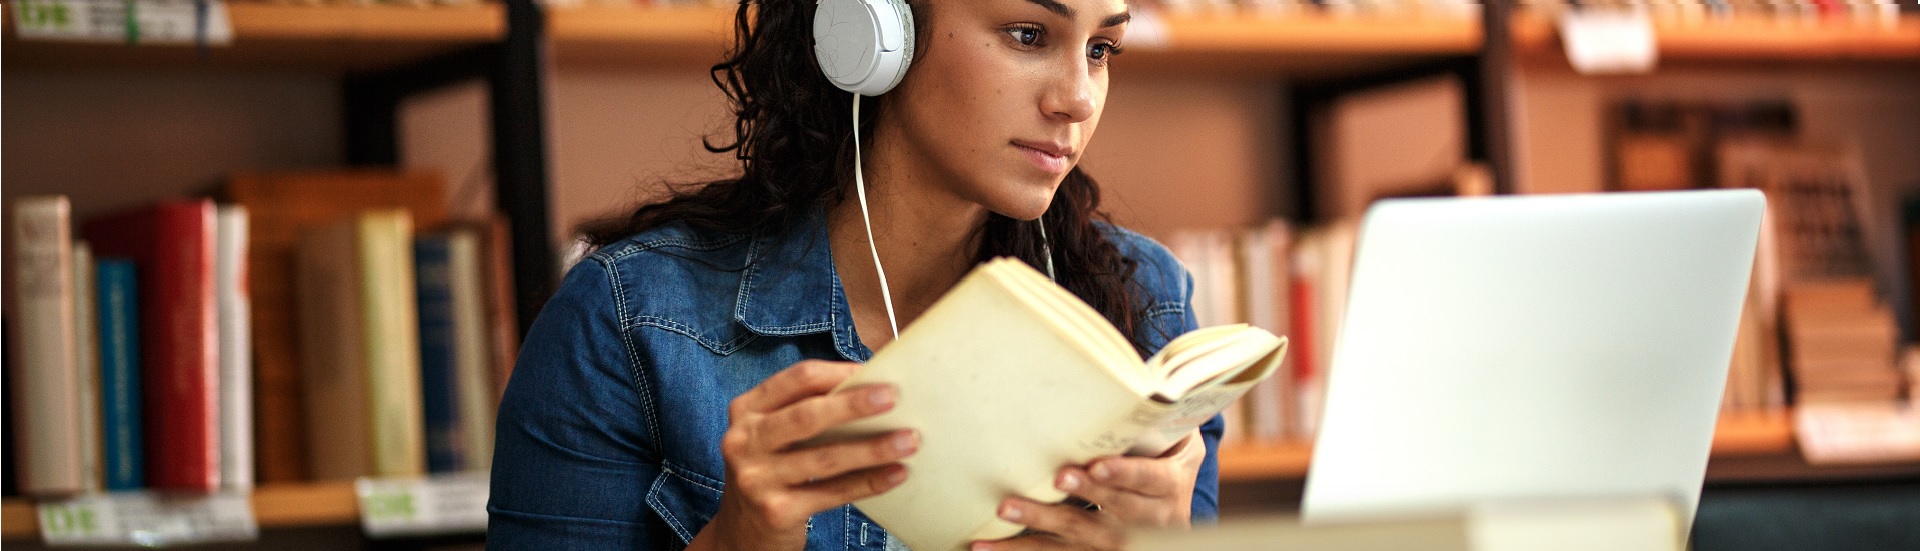 Woman with headphones with book and laptop